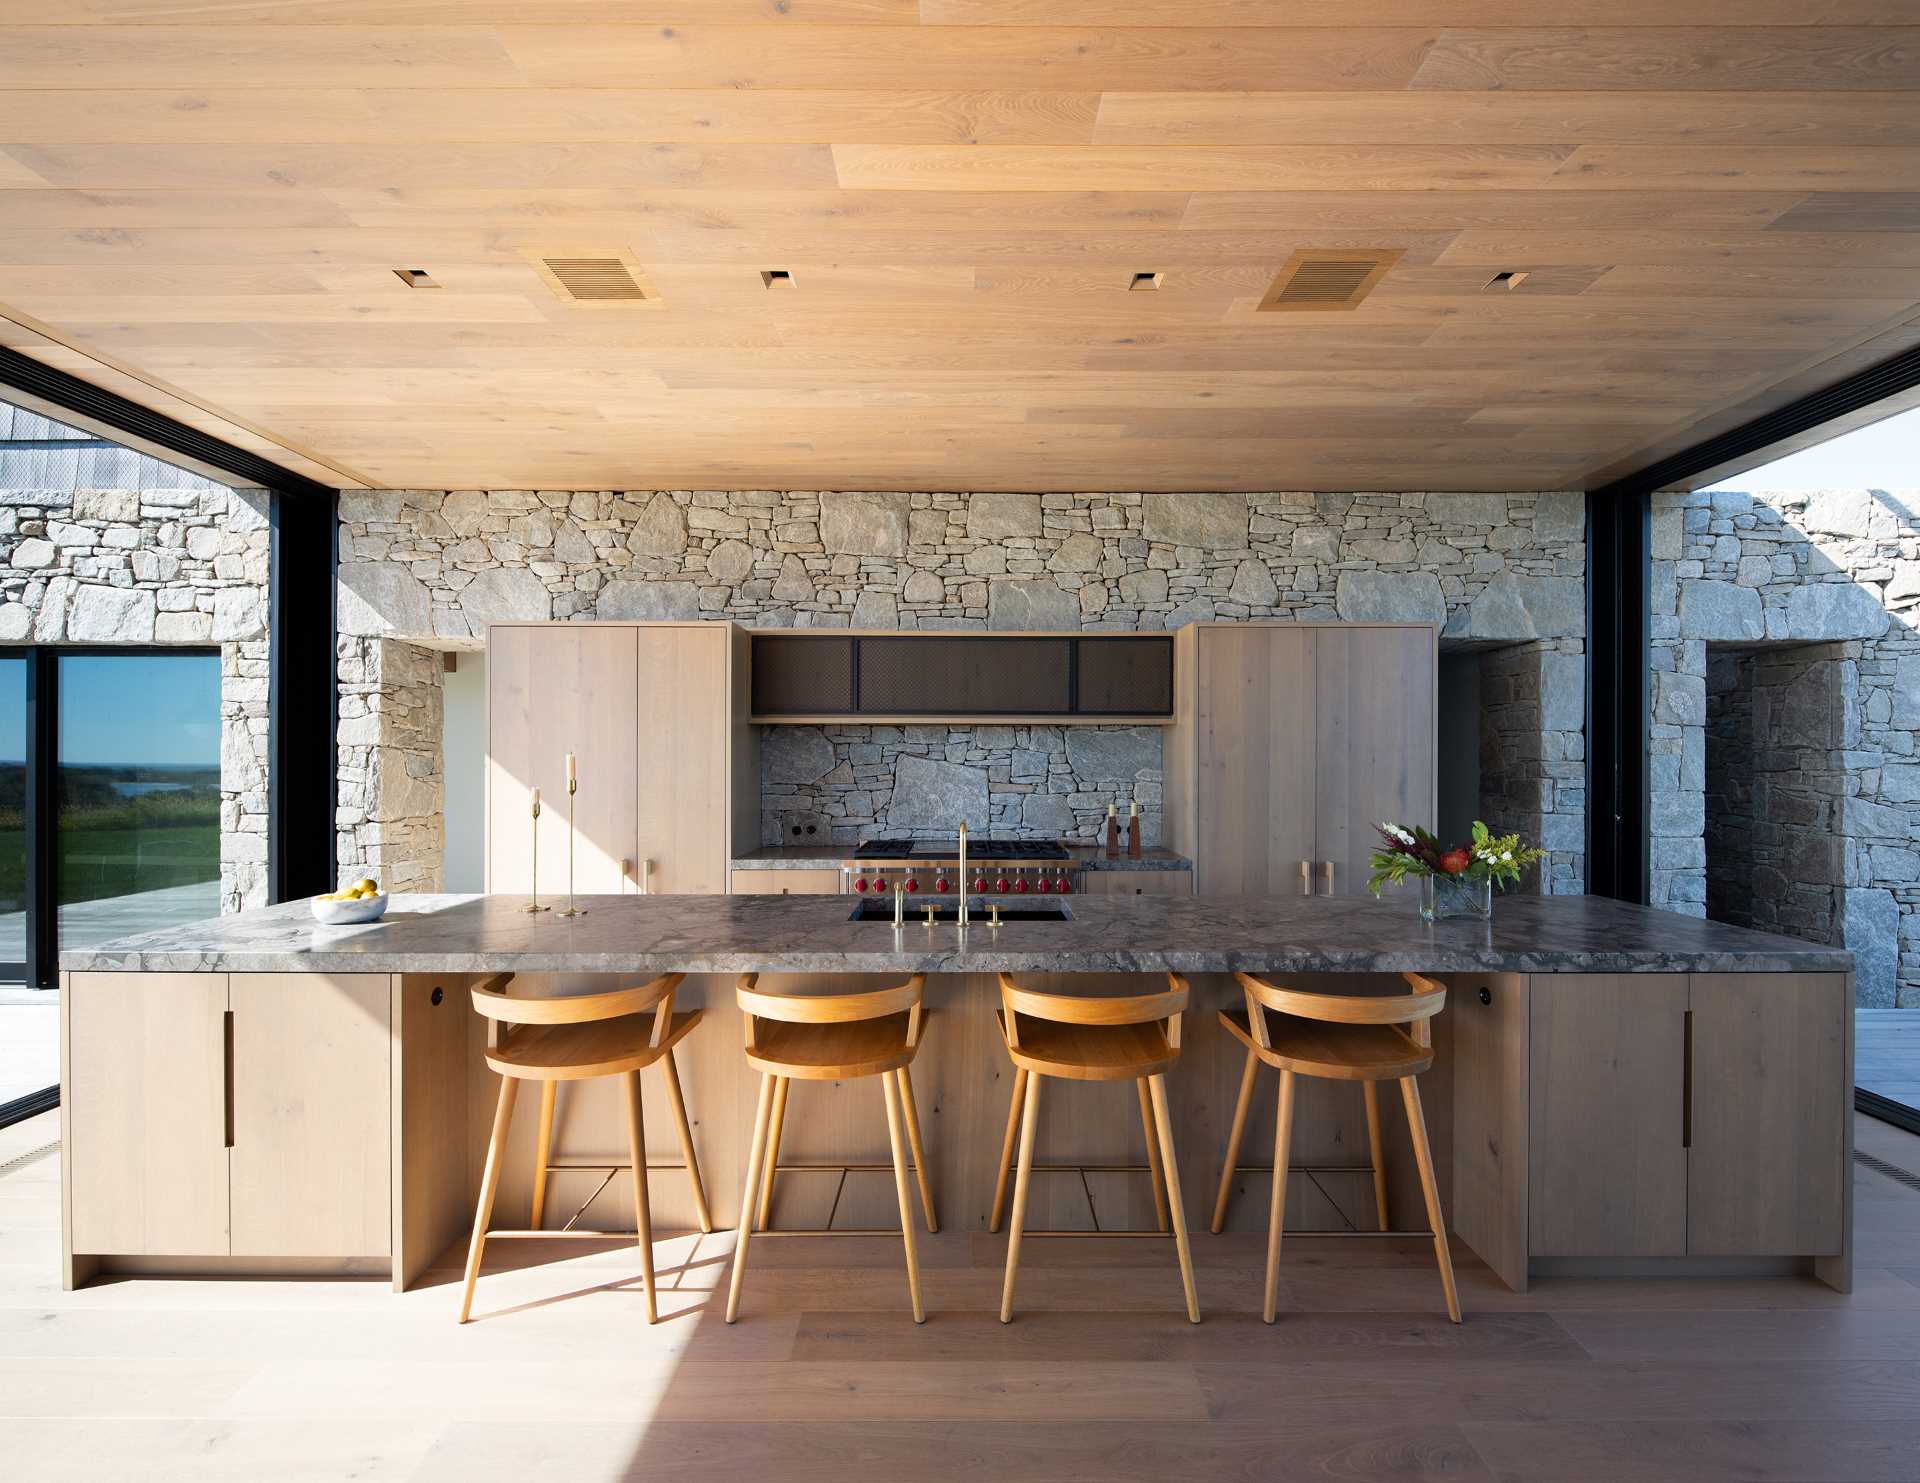 A modern kitchen with a stone wall that travels from the interior to the exterior of the home.